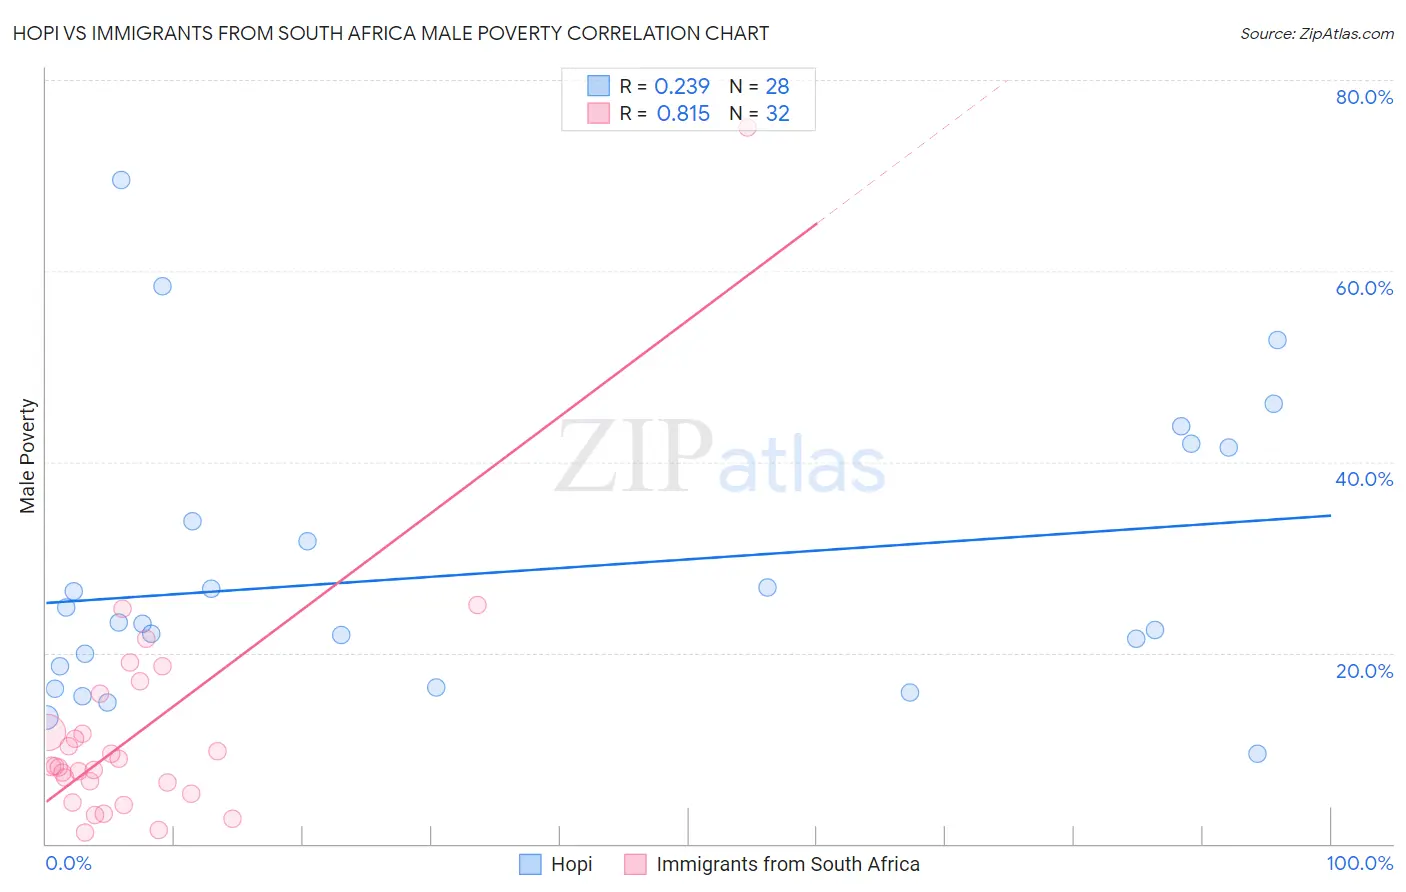 Hopi vs Immigrants from South Africa Male Poverty